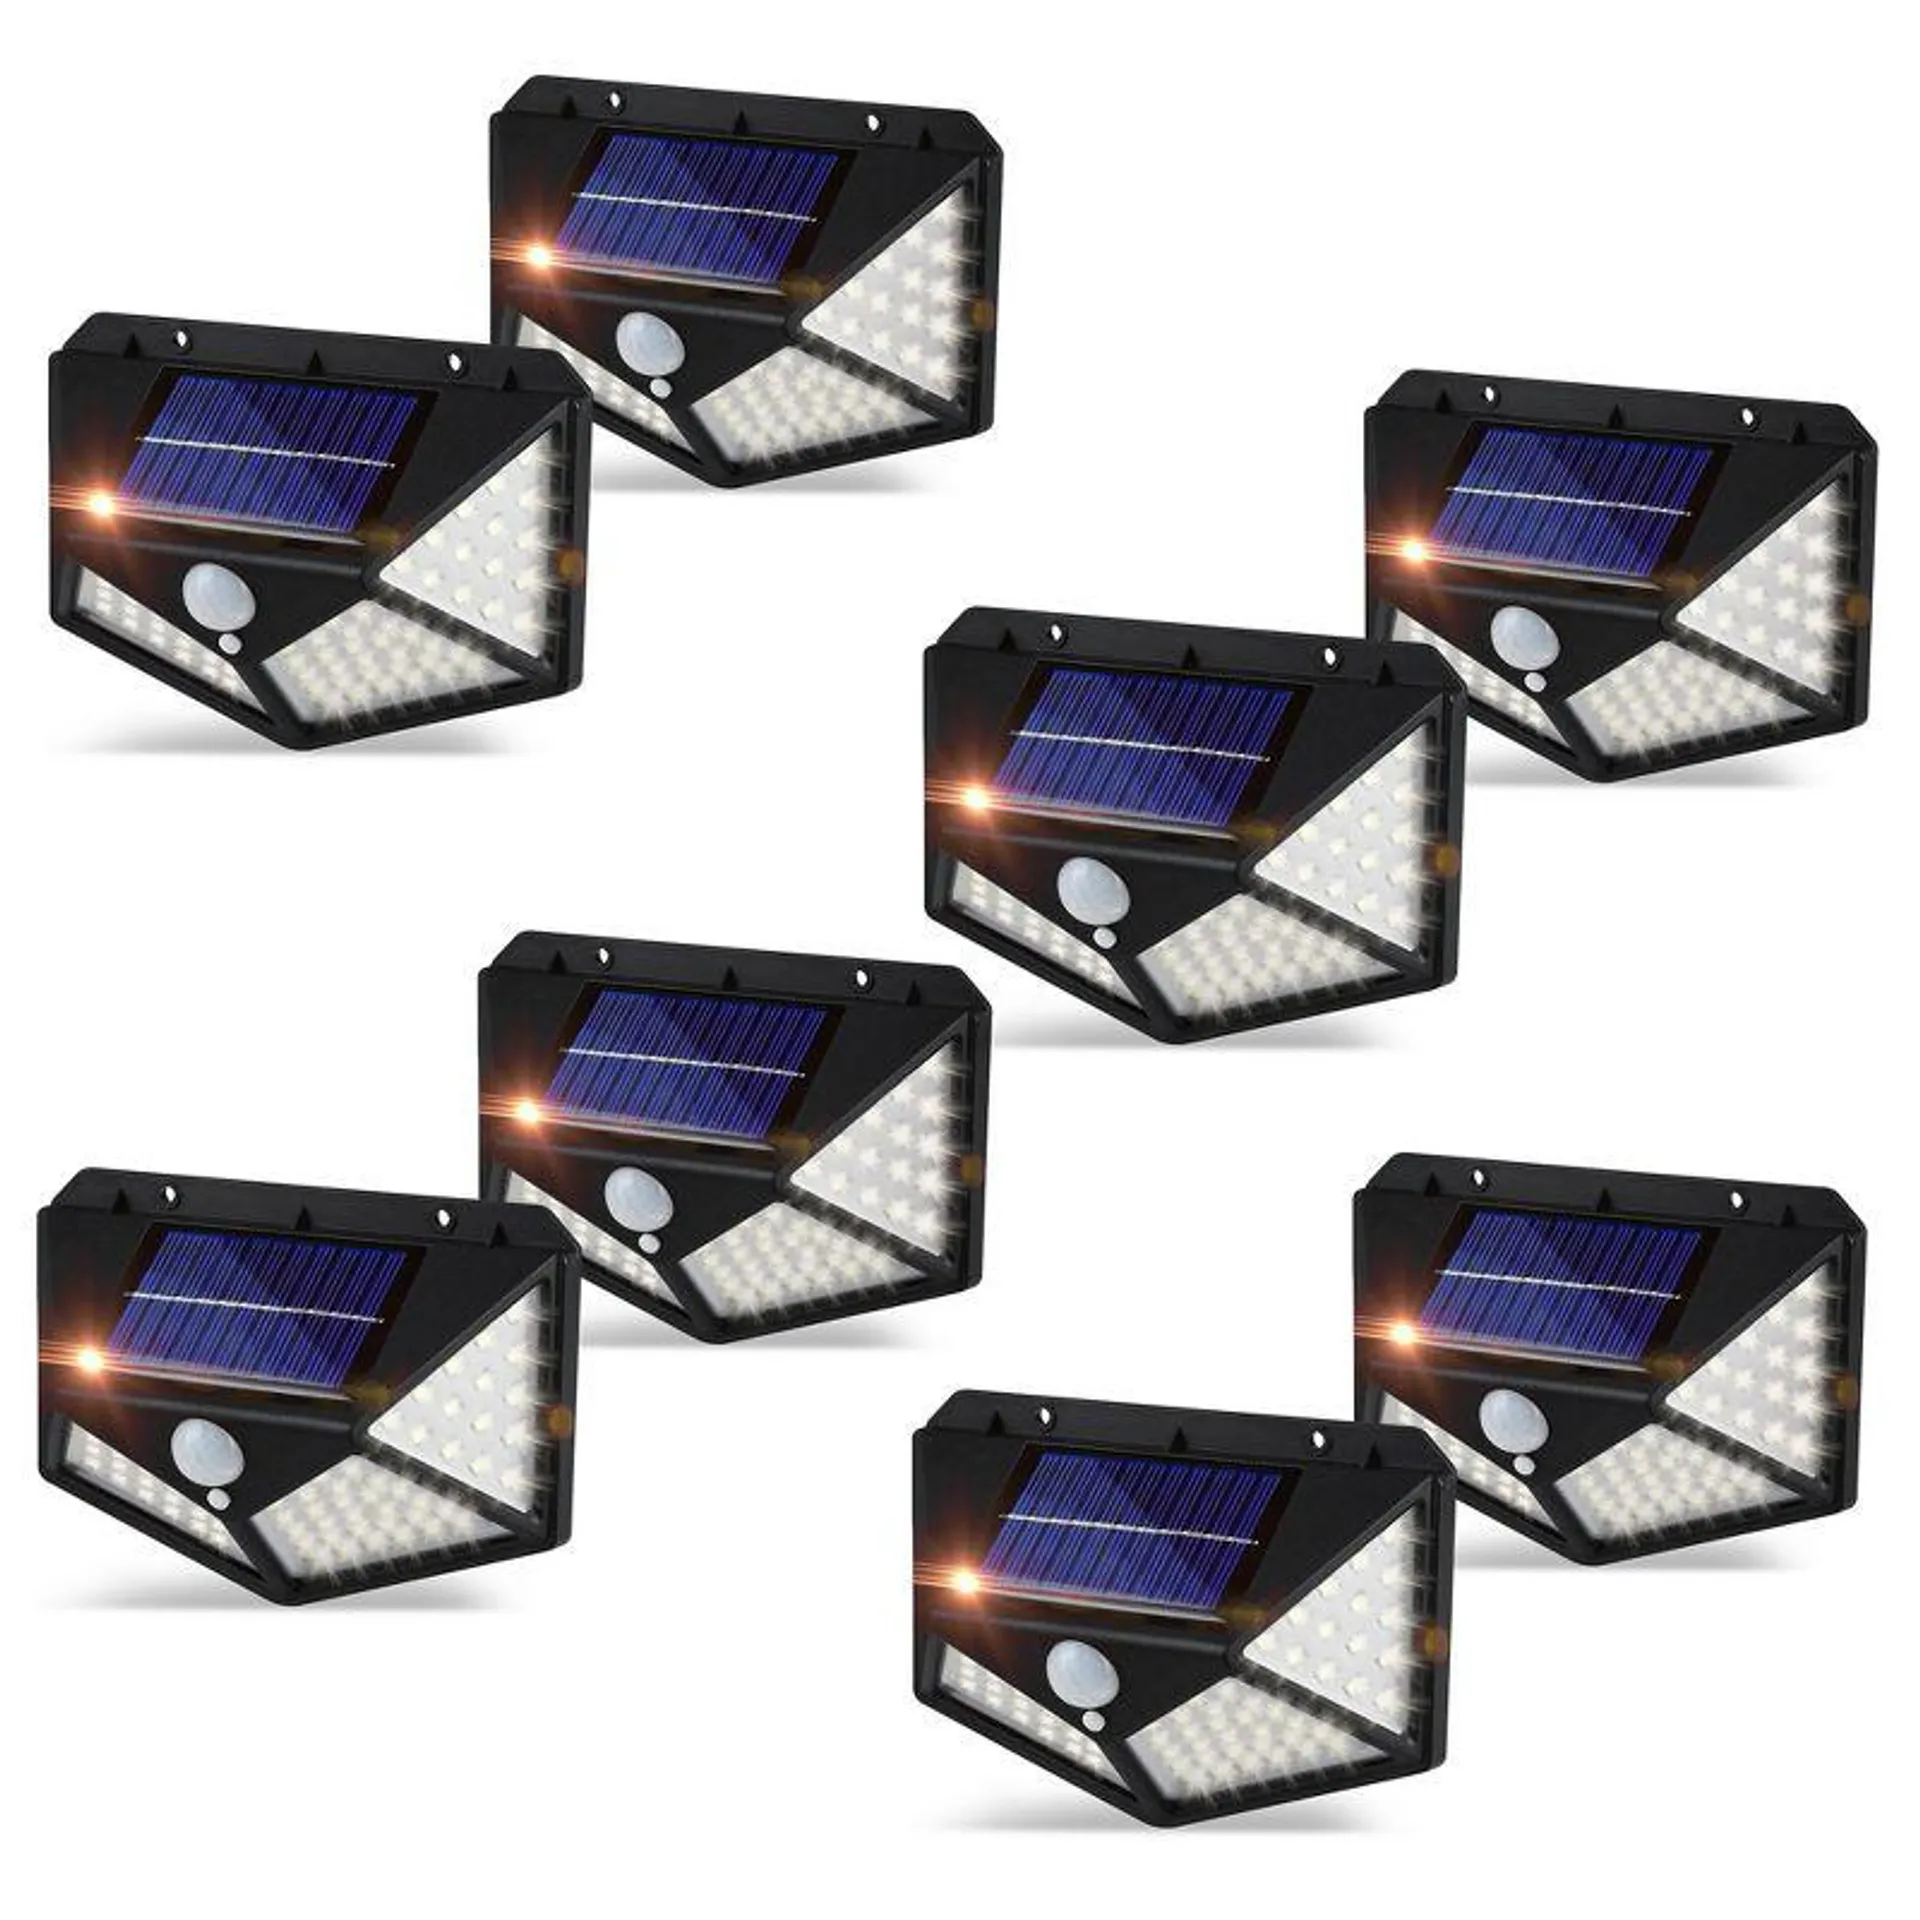 Dartwood Outdoor Solar Lights with Motion Sensor - 100 LED 450 Lumens Bright Weatherproof Wall Spotlight for Gardens Porches Walkways Patio (4-8 Pack)